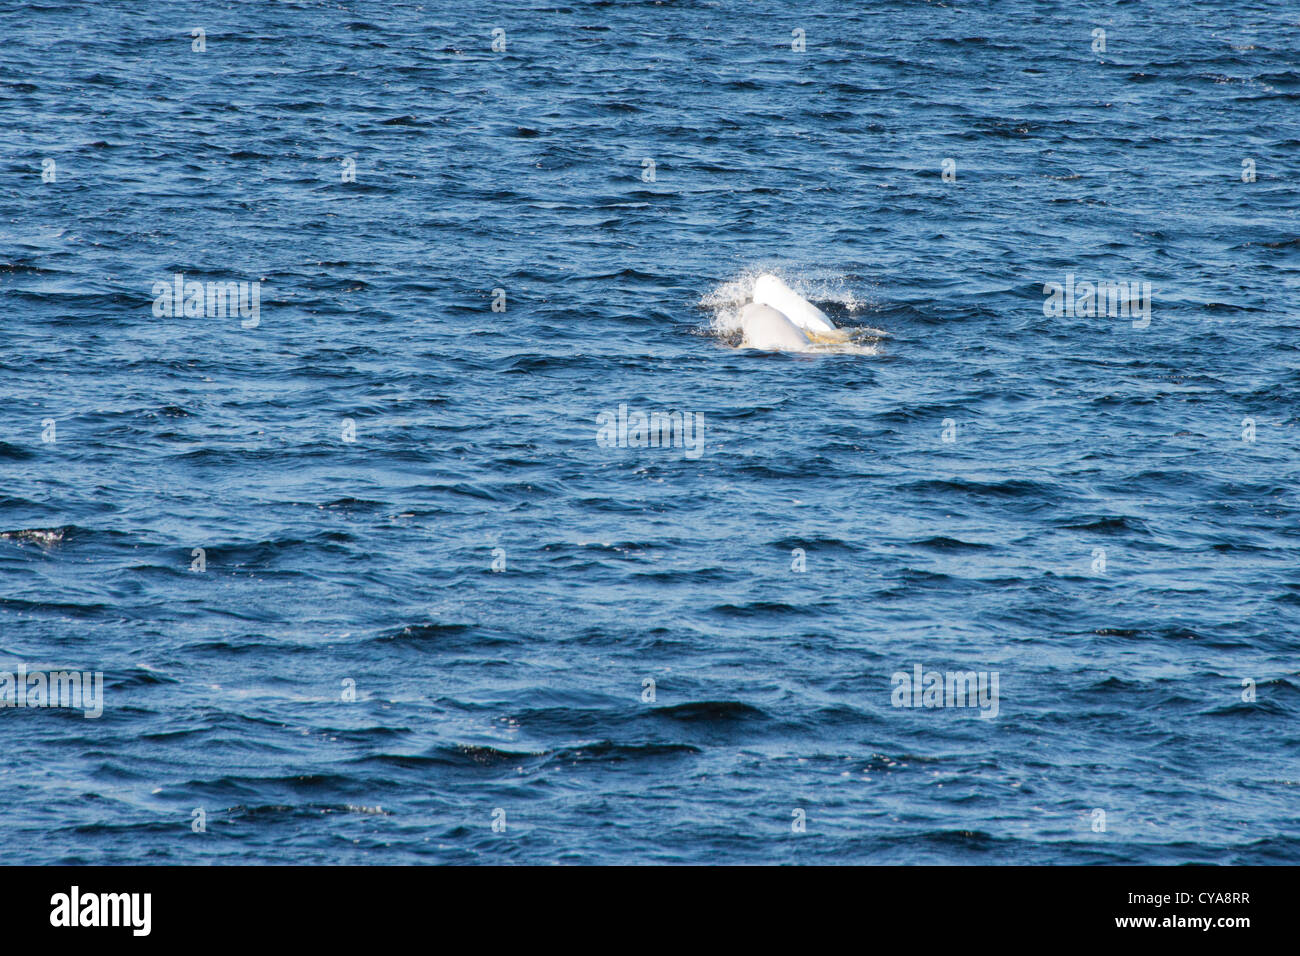 Canada, Quebec, Saguenay River. Whale watching, Beluga whales (WILD: Delphinapterus leucas). Saguenay–St. Lawrence Marine Park. Stock Photo